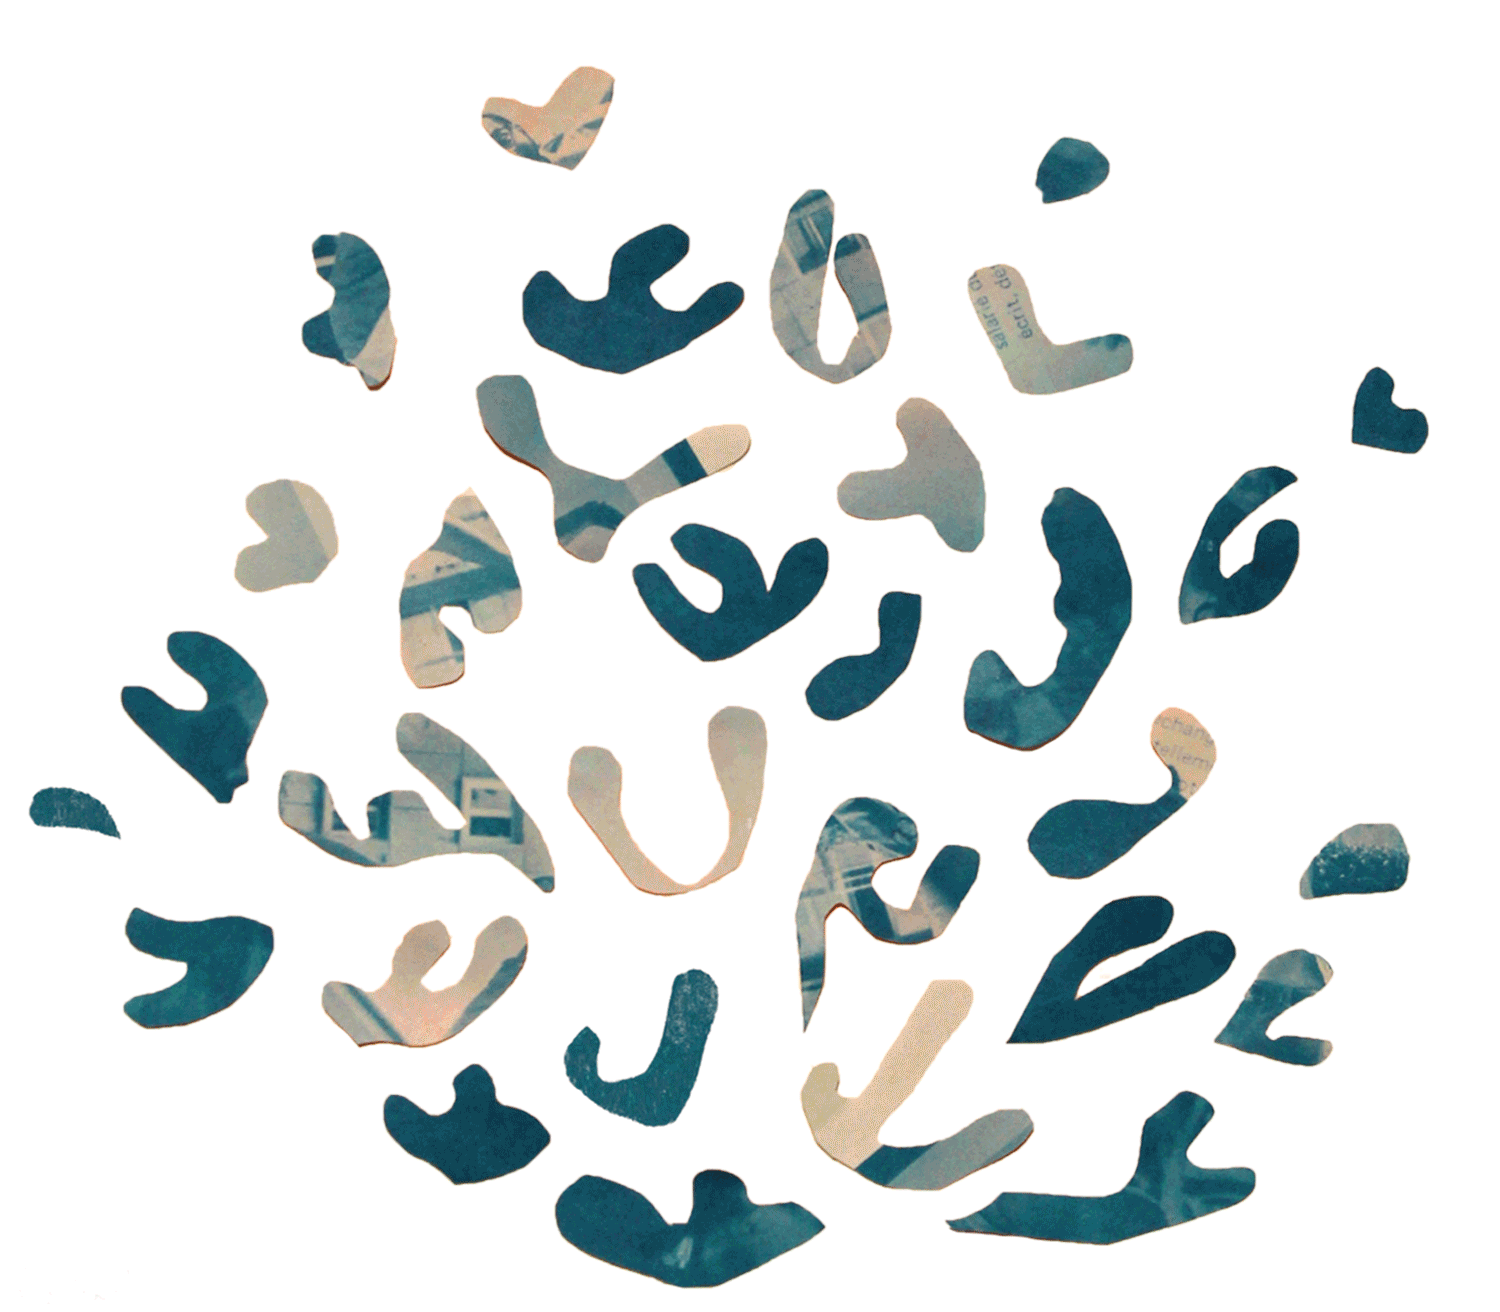 Gif in which paper cutouts, in a coral-like pattern, slowly change from blue to orange and back